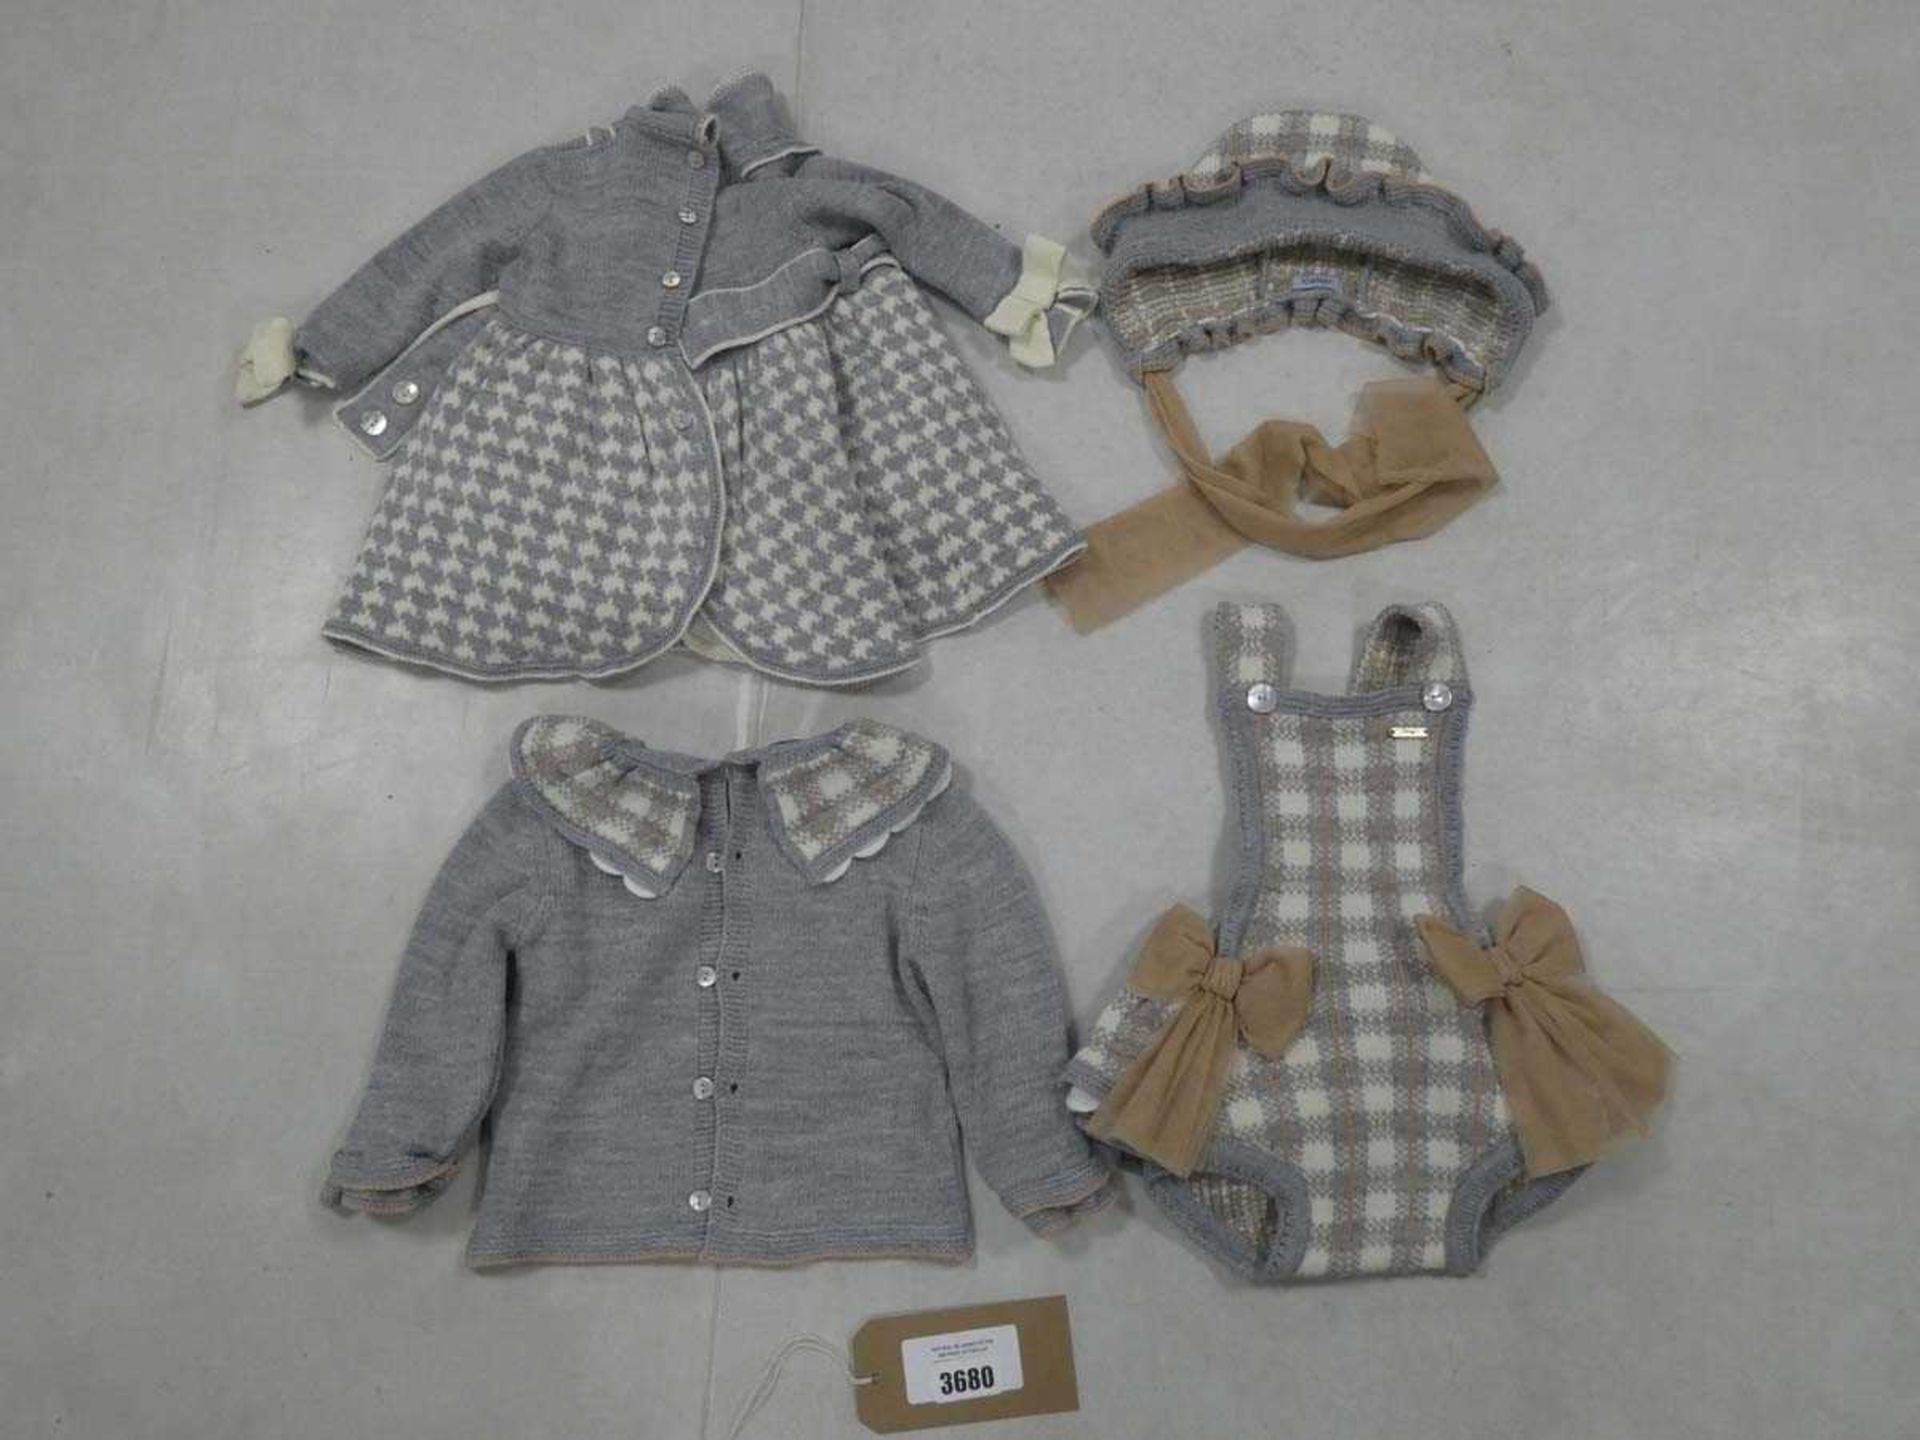 Selection of Rahigo baby clothing in various styles ages 6 & 12 months